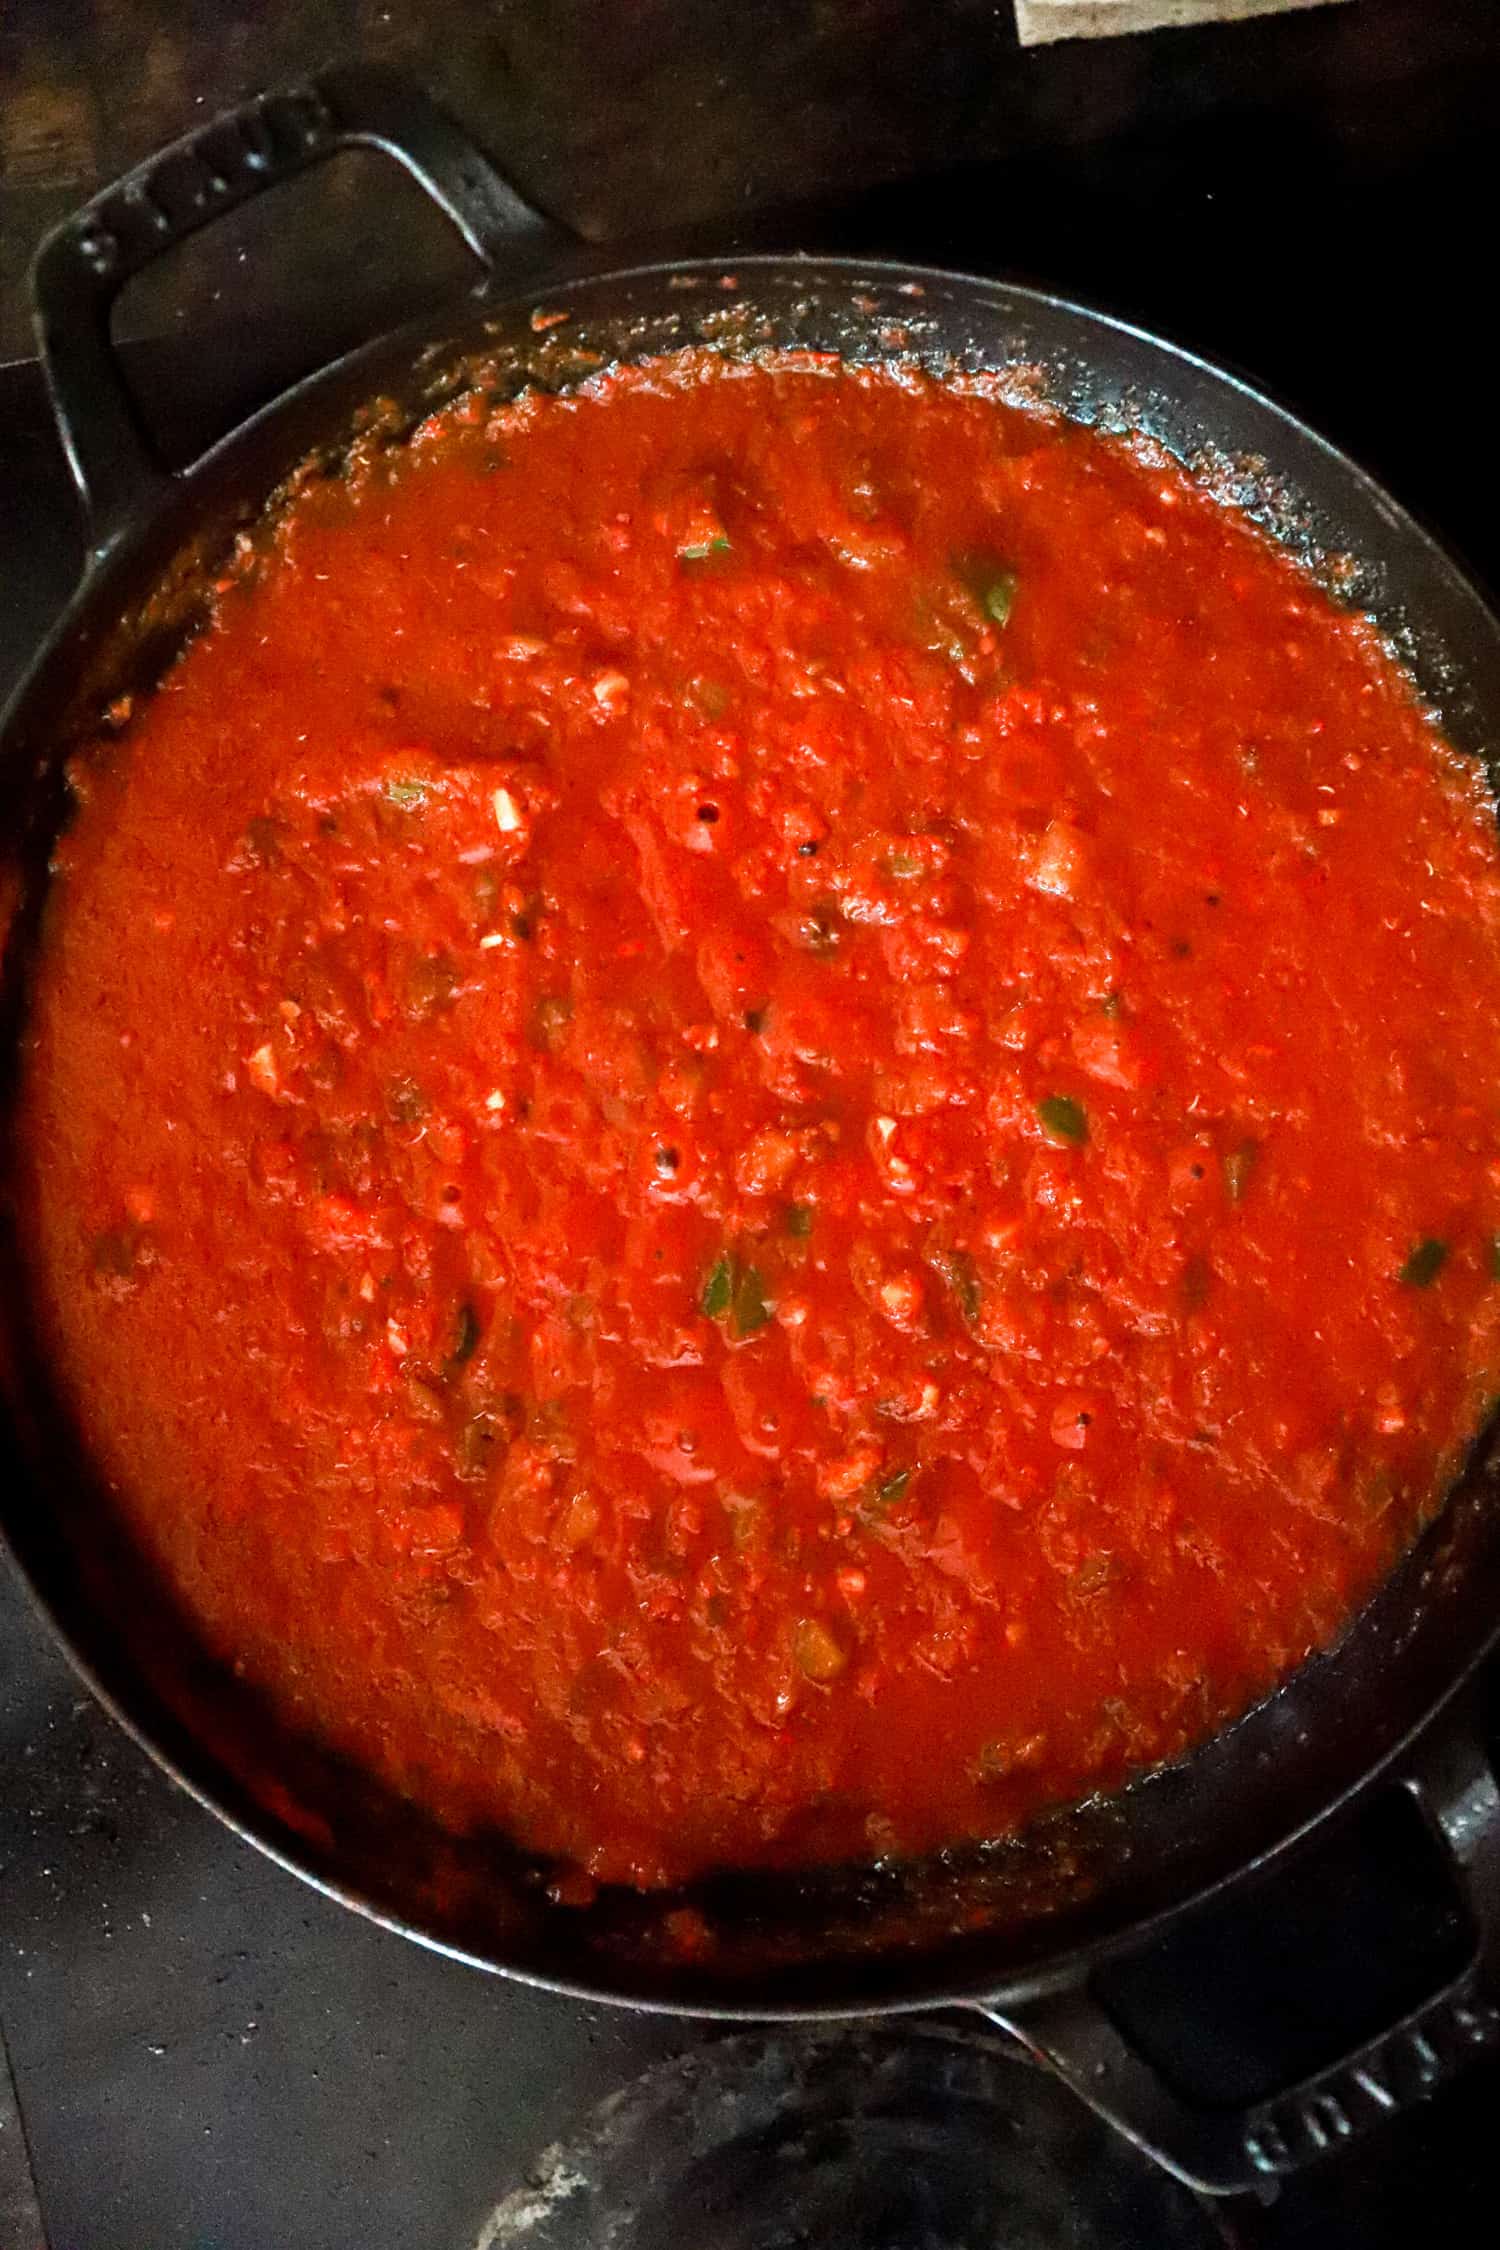 red tomato sauce simmering in a black skillet.